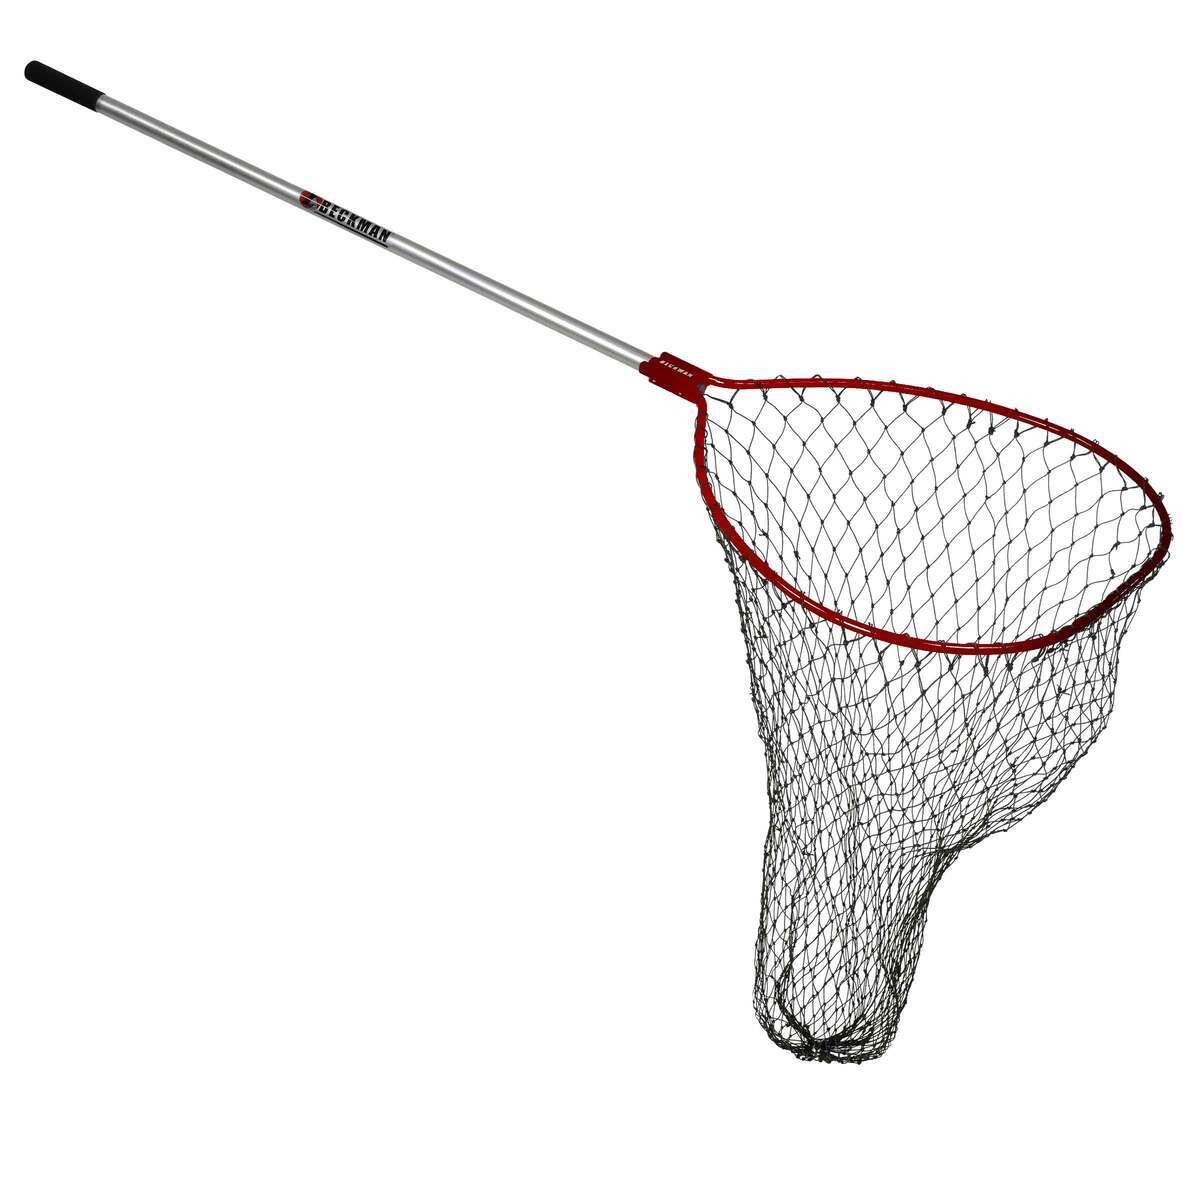 New Beckman Coated Landing Net - boats - by owner - marine sale